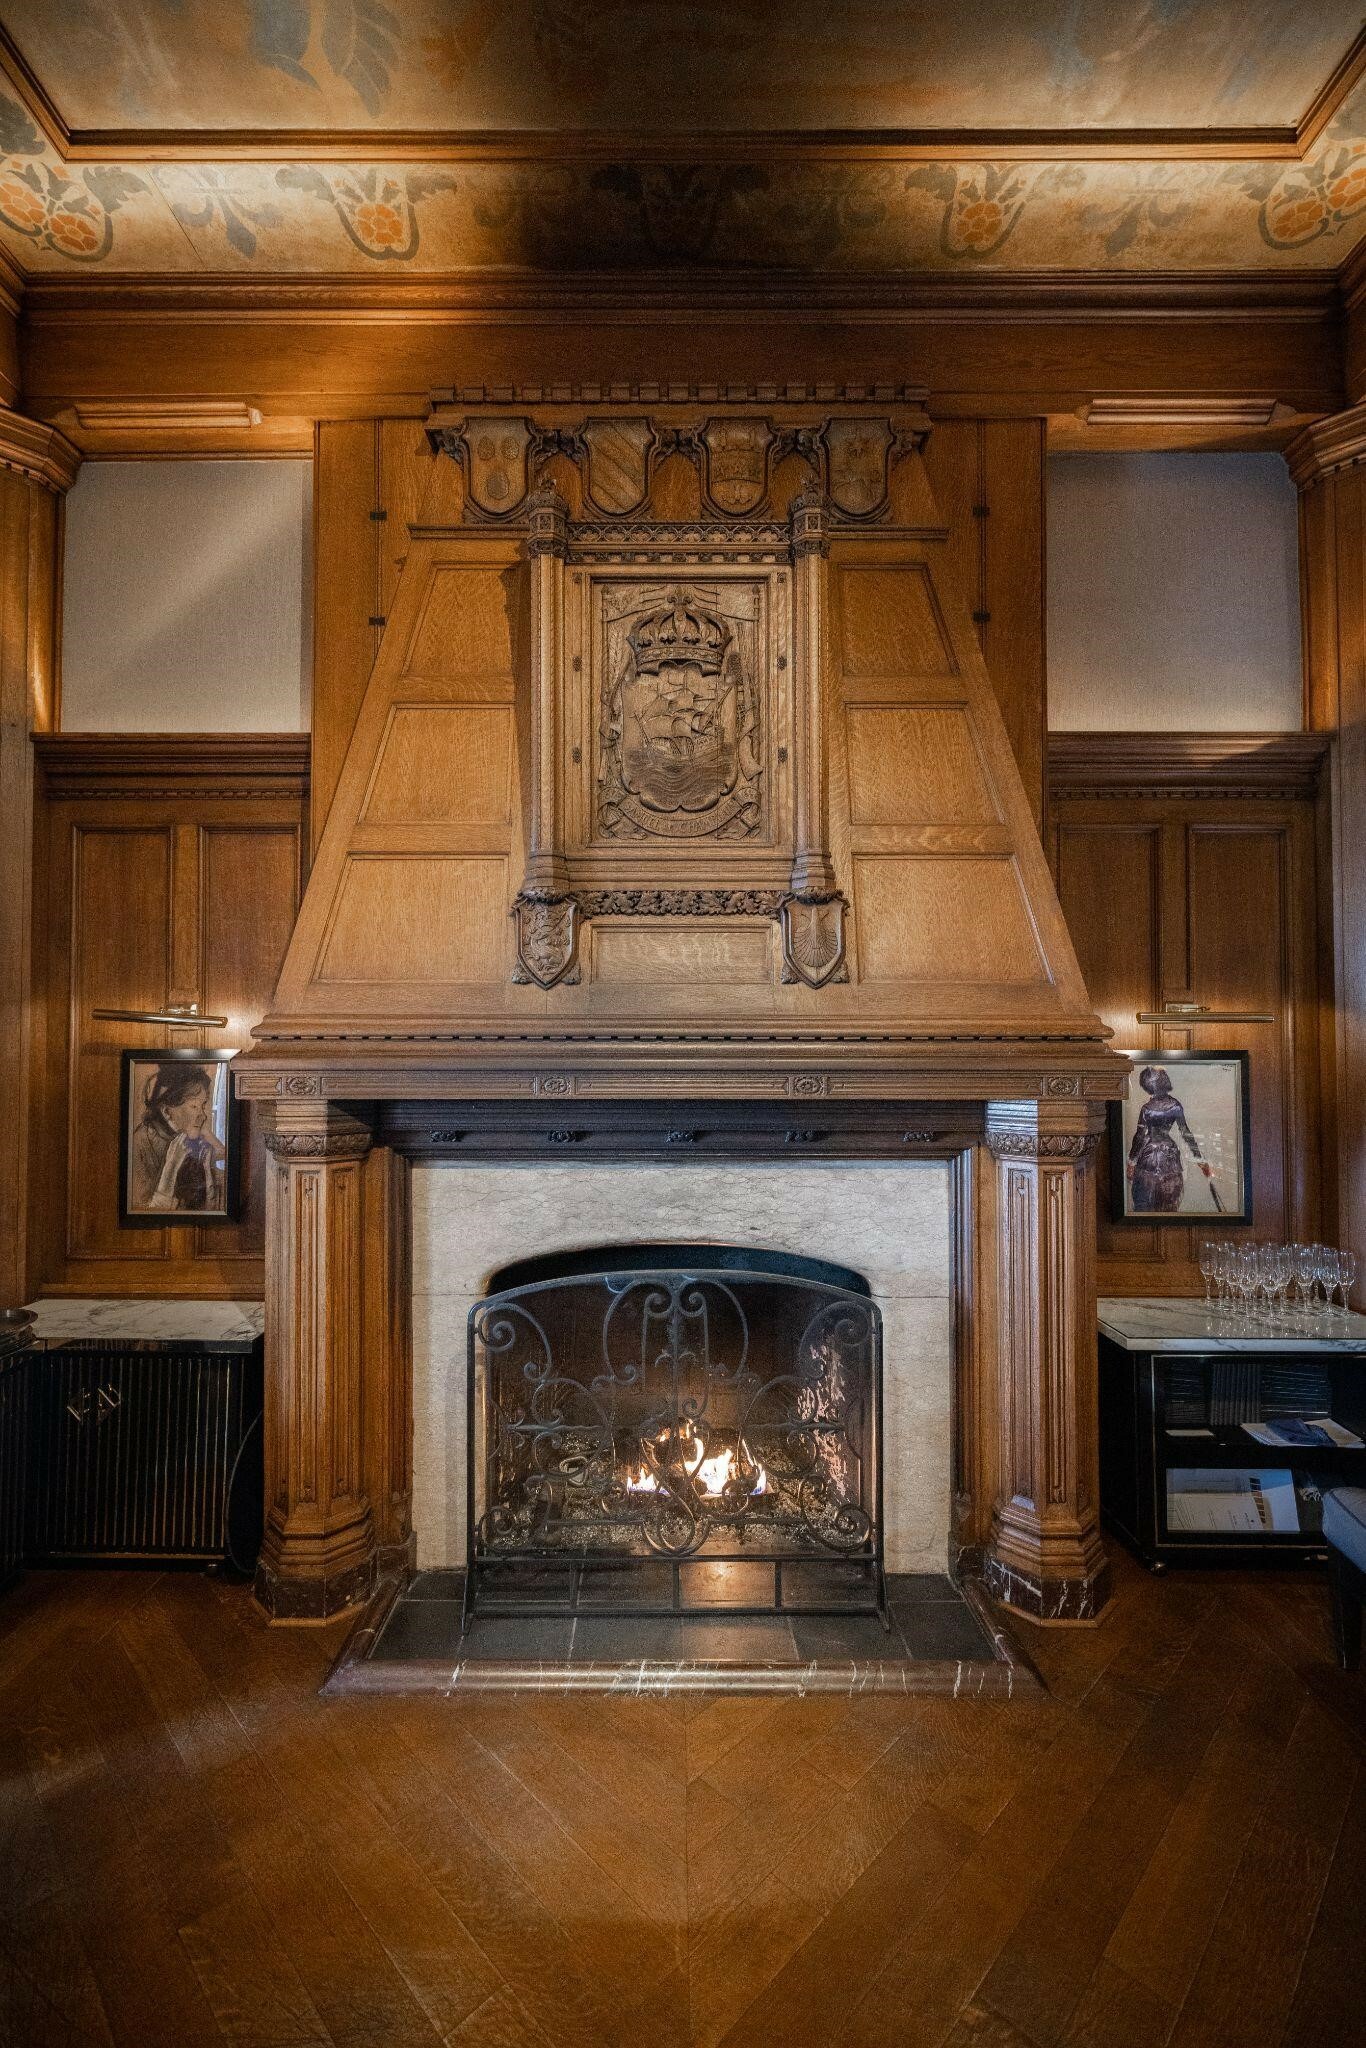 10 Ultra-Cozy Hotels With Fireplaces in Every Room